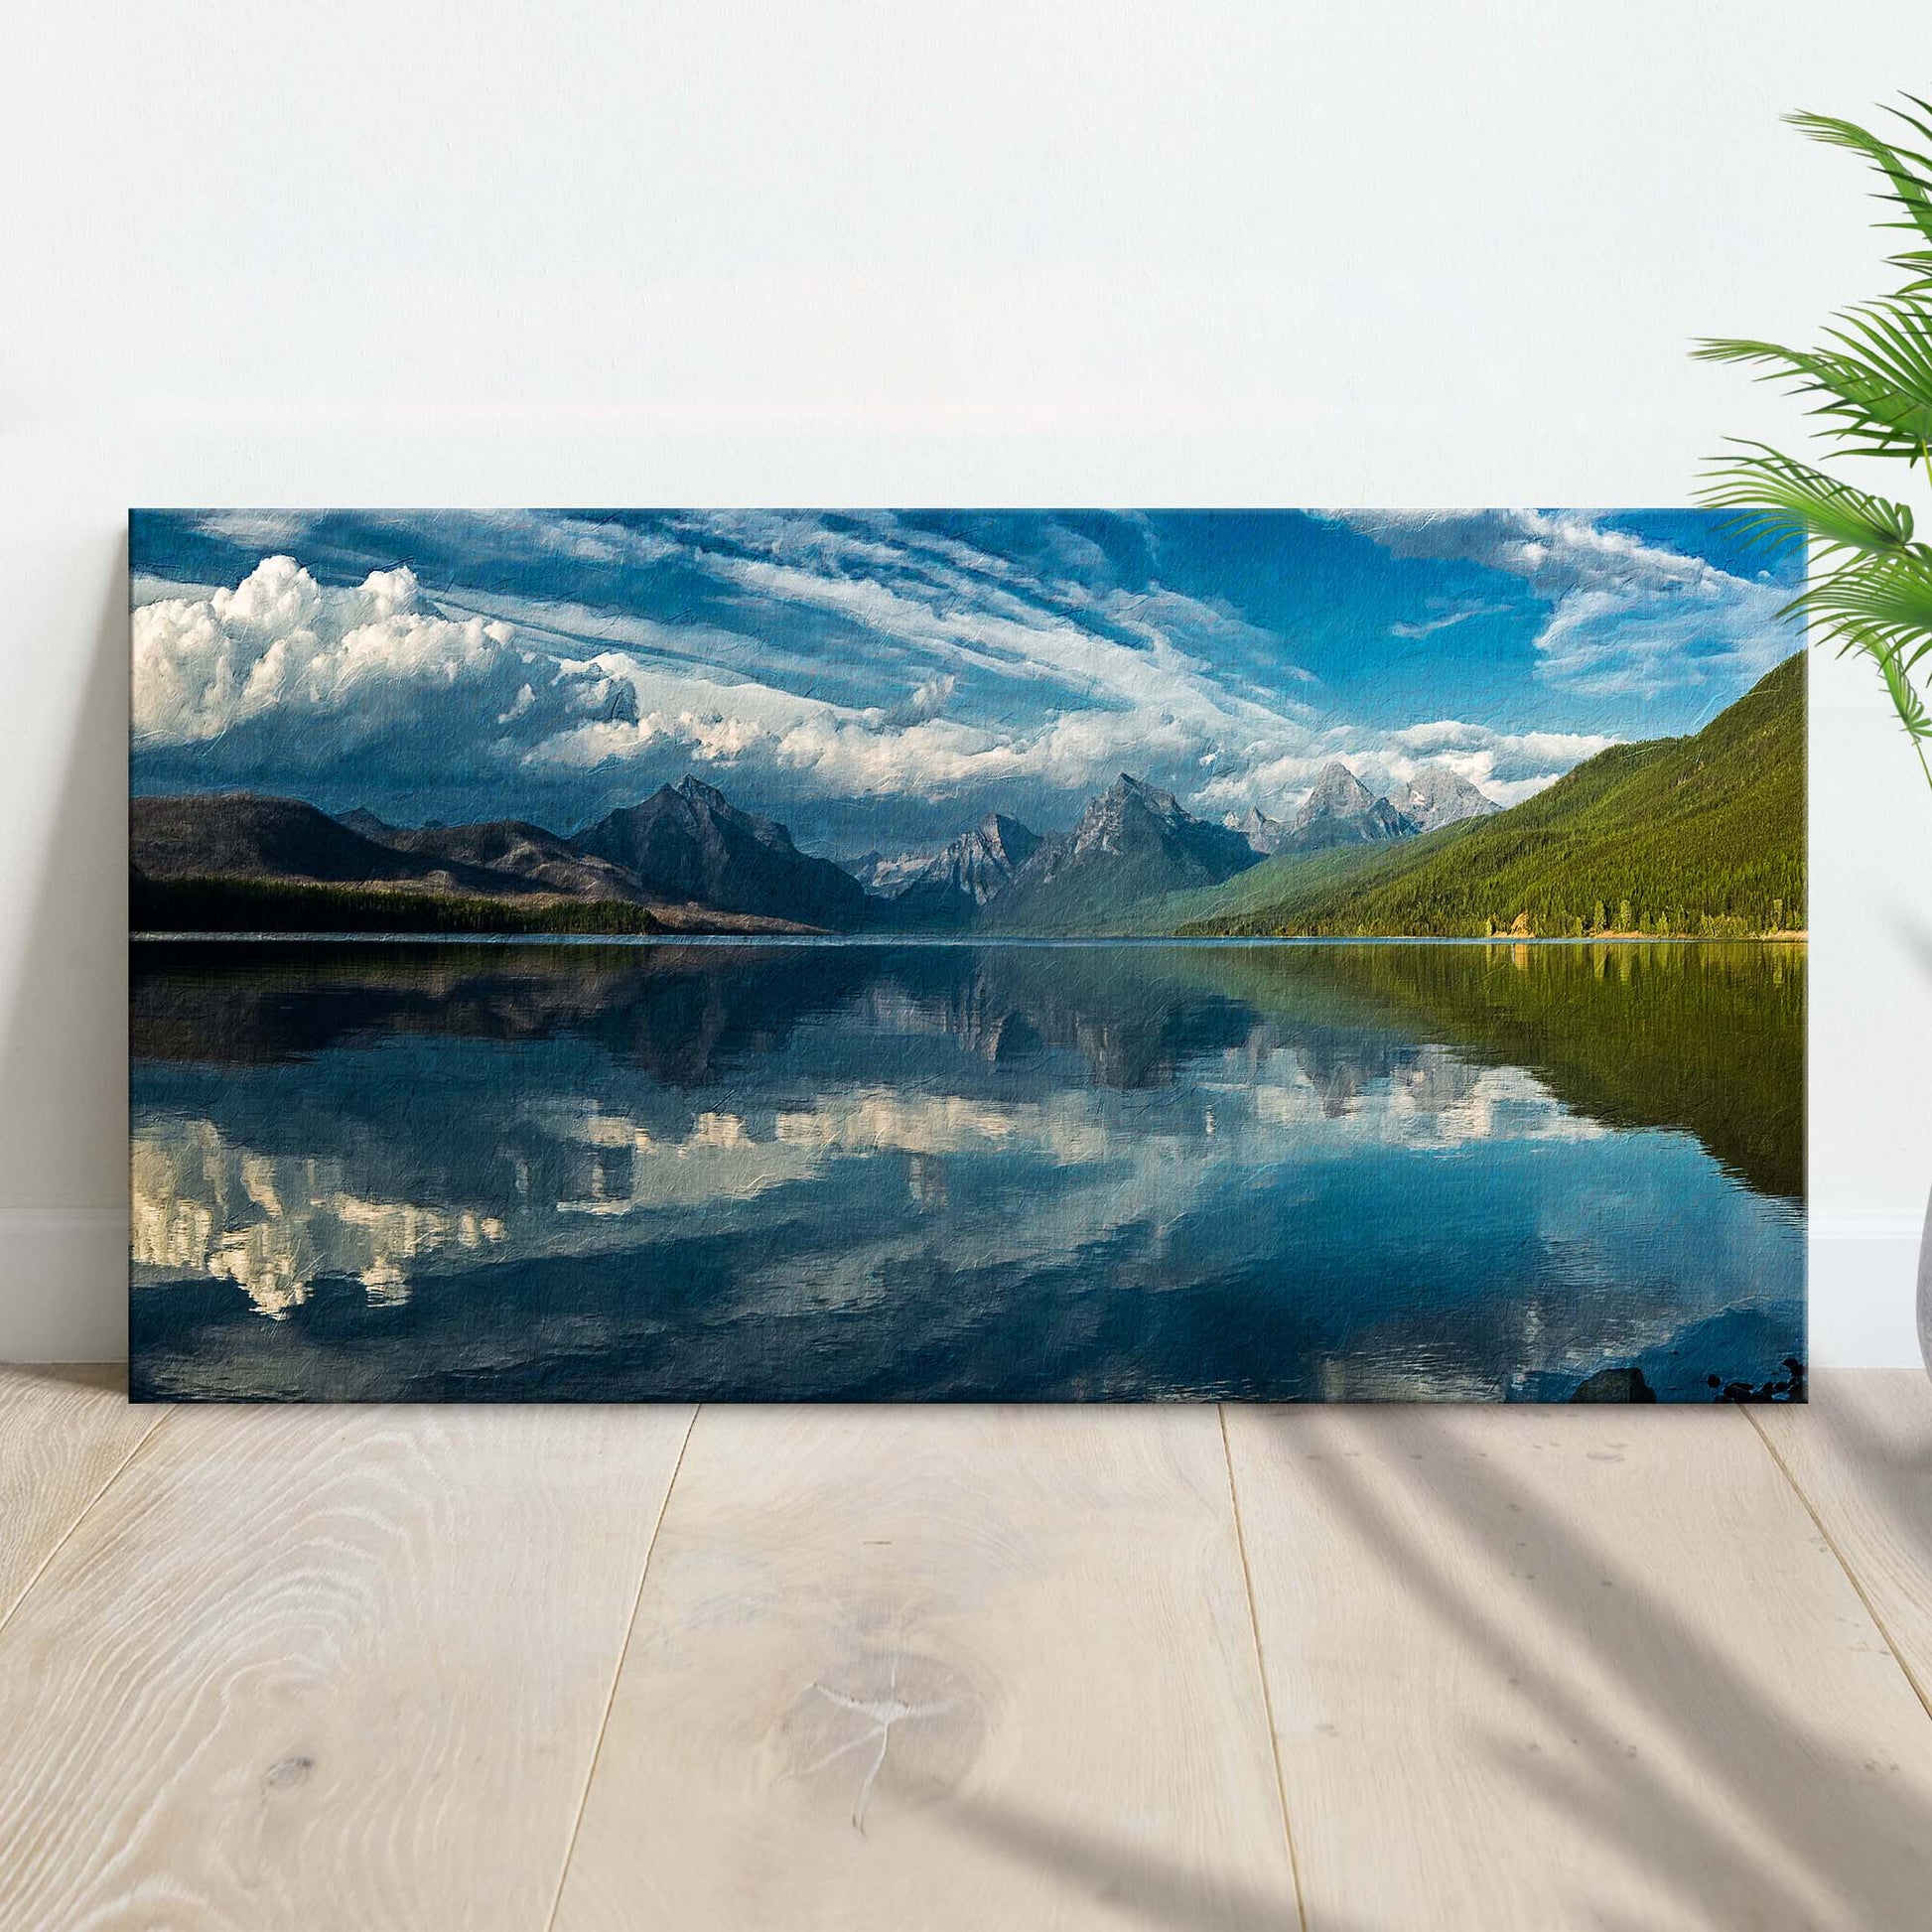 Lake McDonald Montana Canvas Wall Art - Image by Tailored Canvases